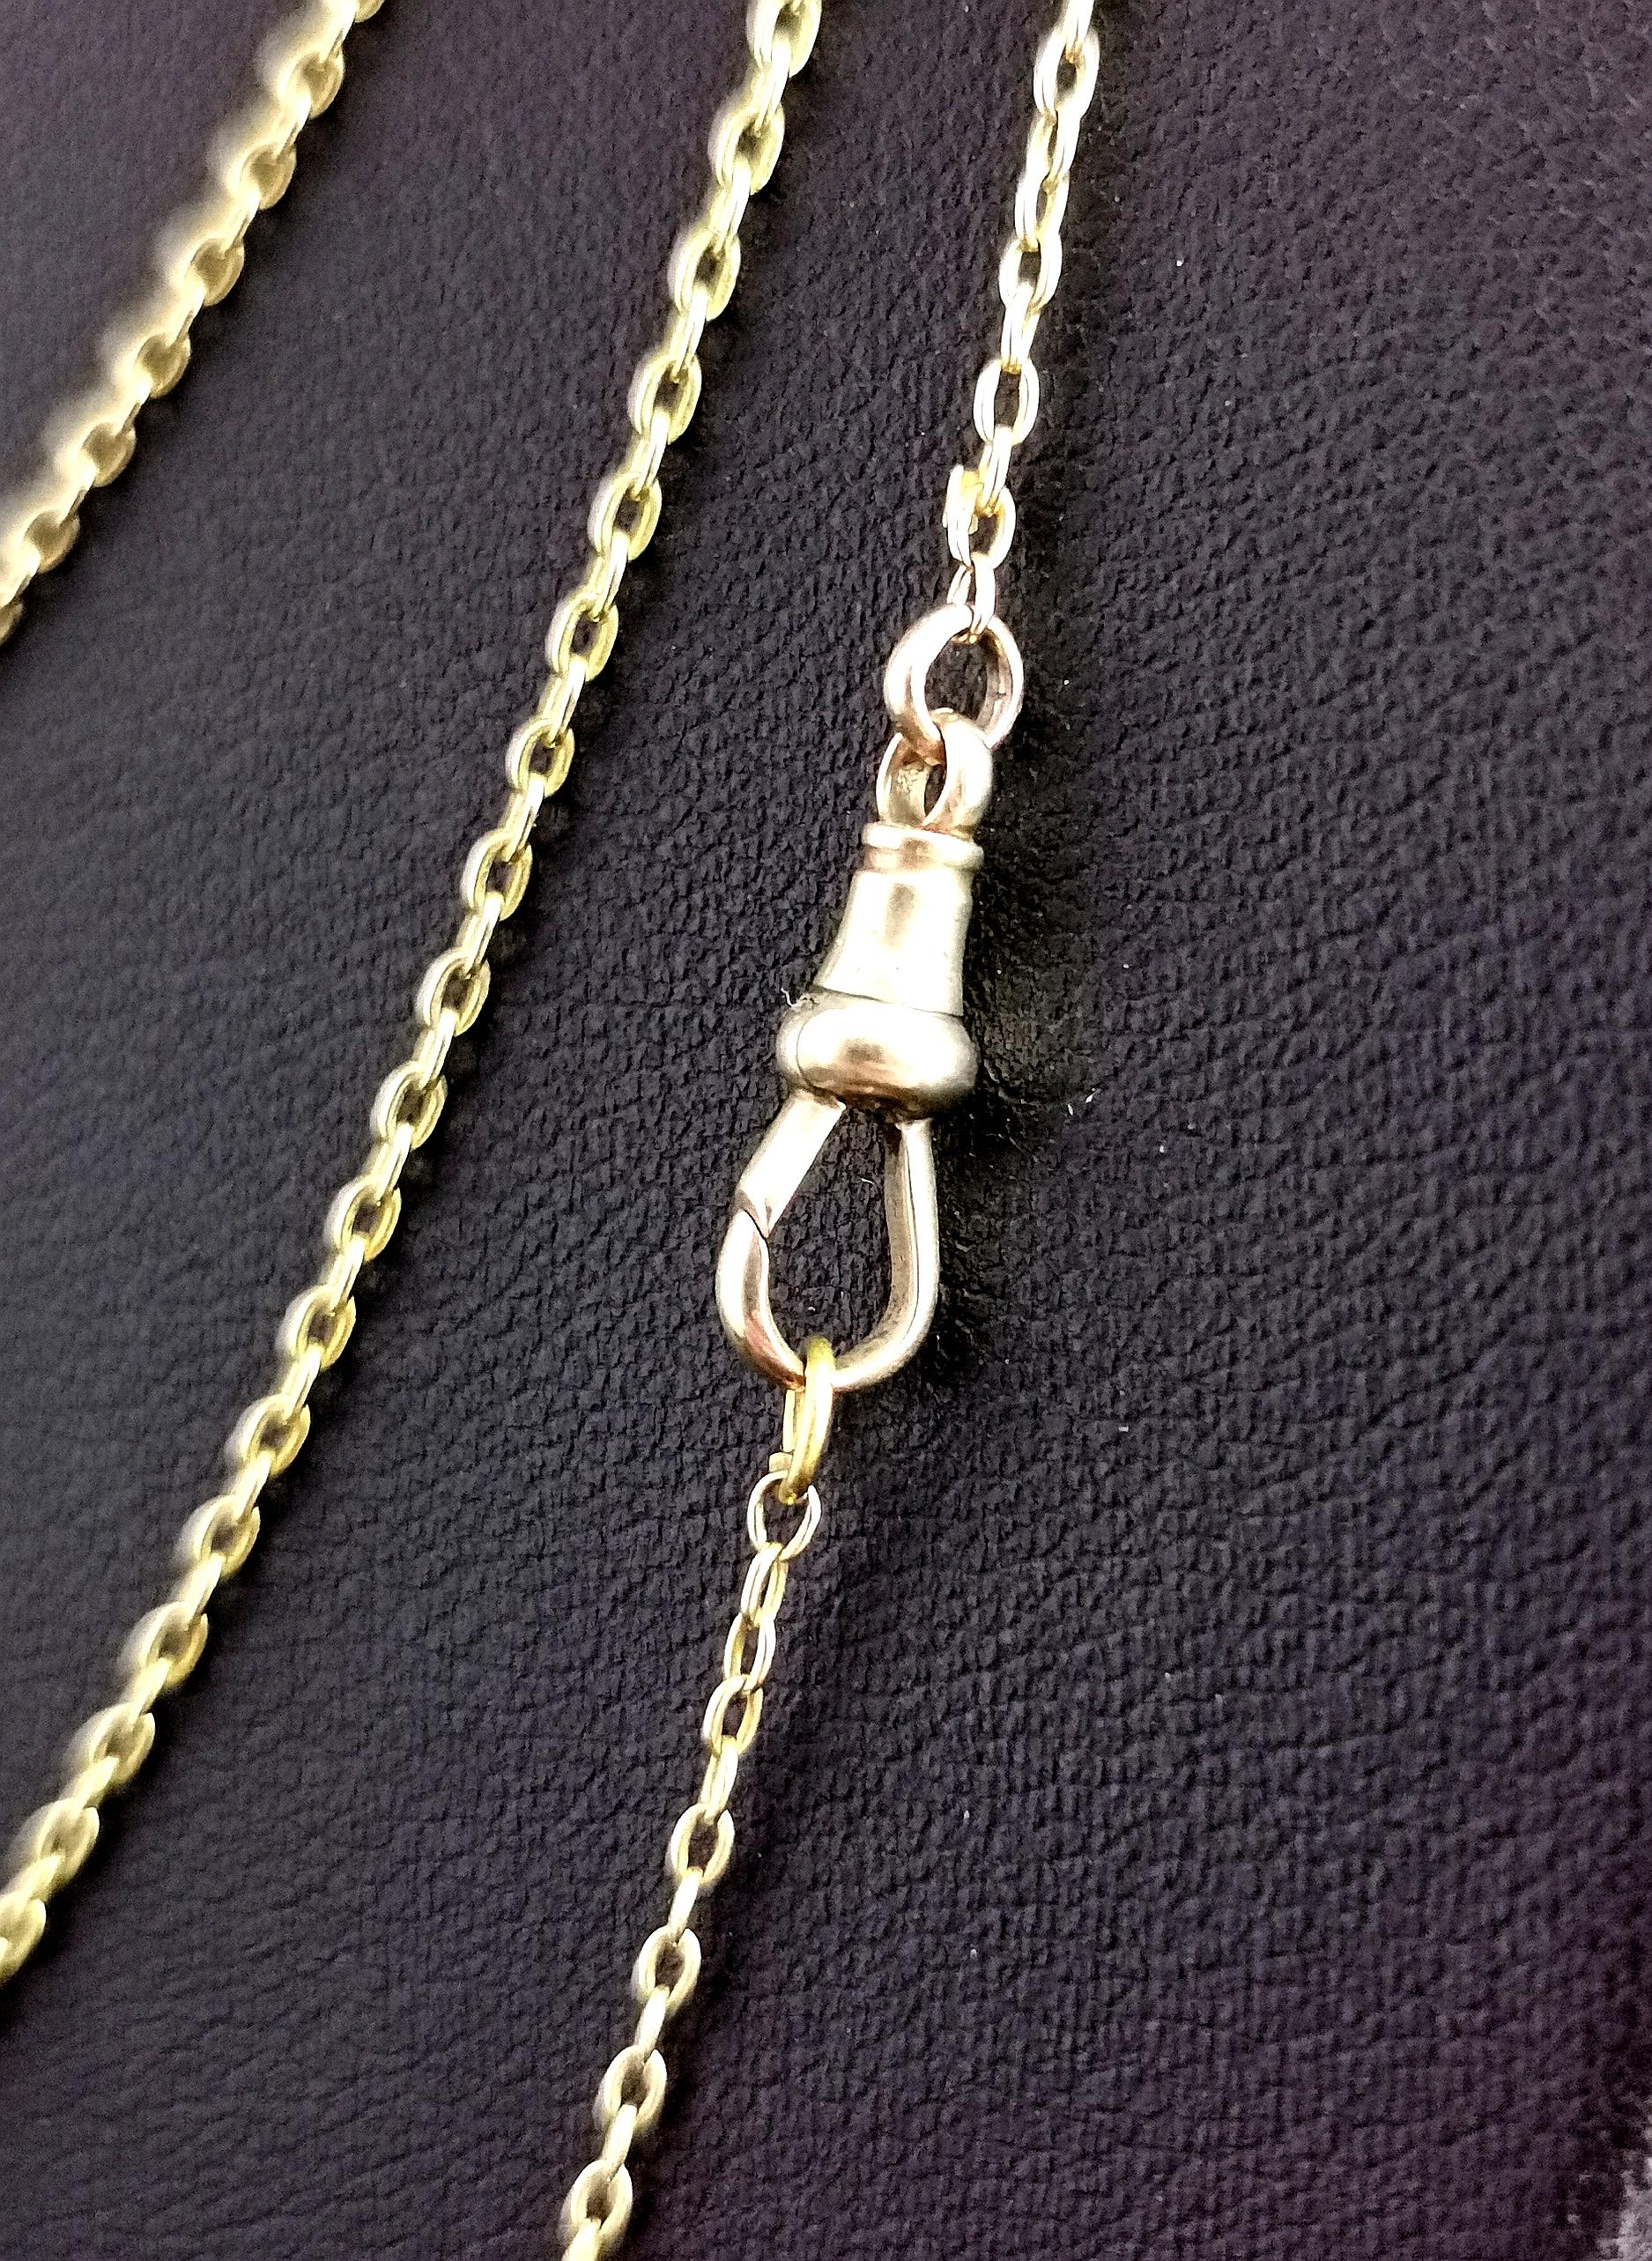 Antique 15k Yellow Gold Longuard Chain Necklace, Trace Link 6